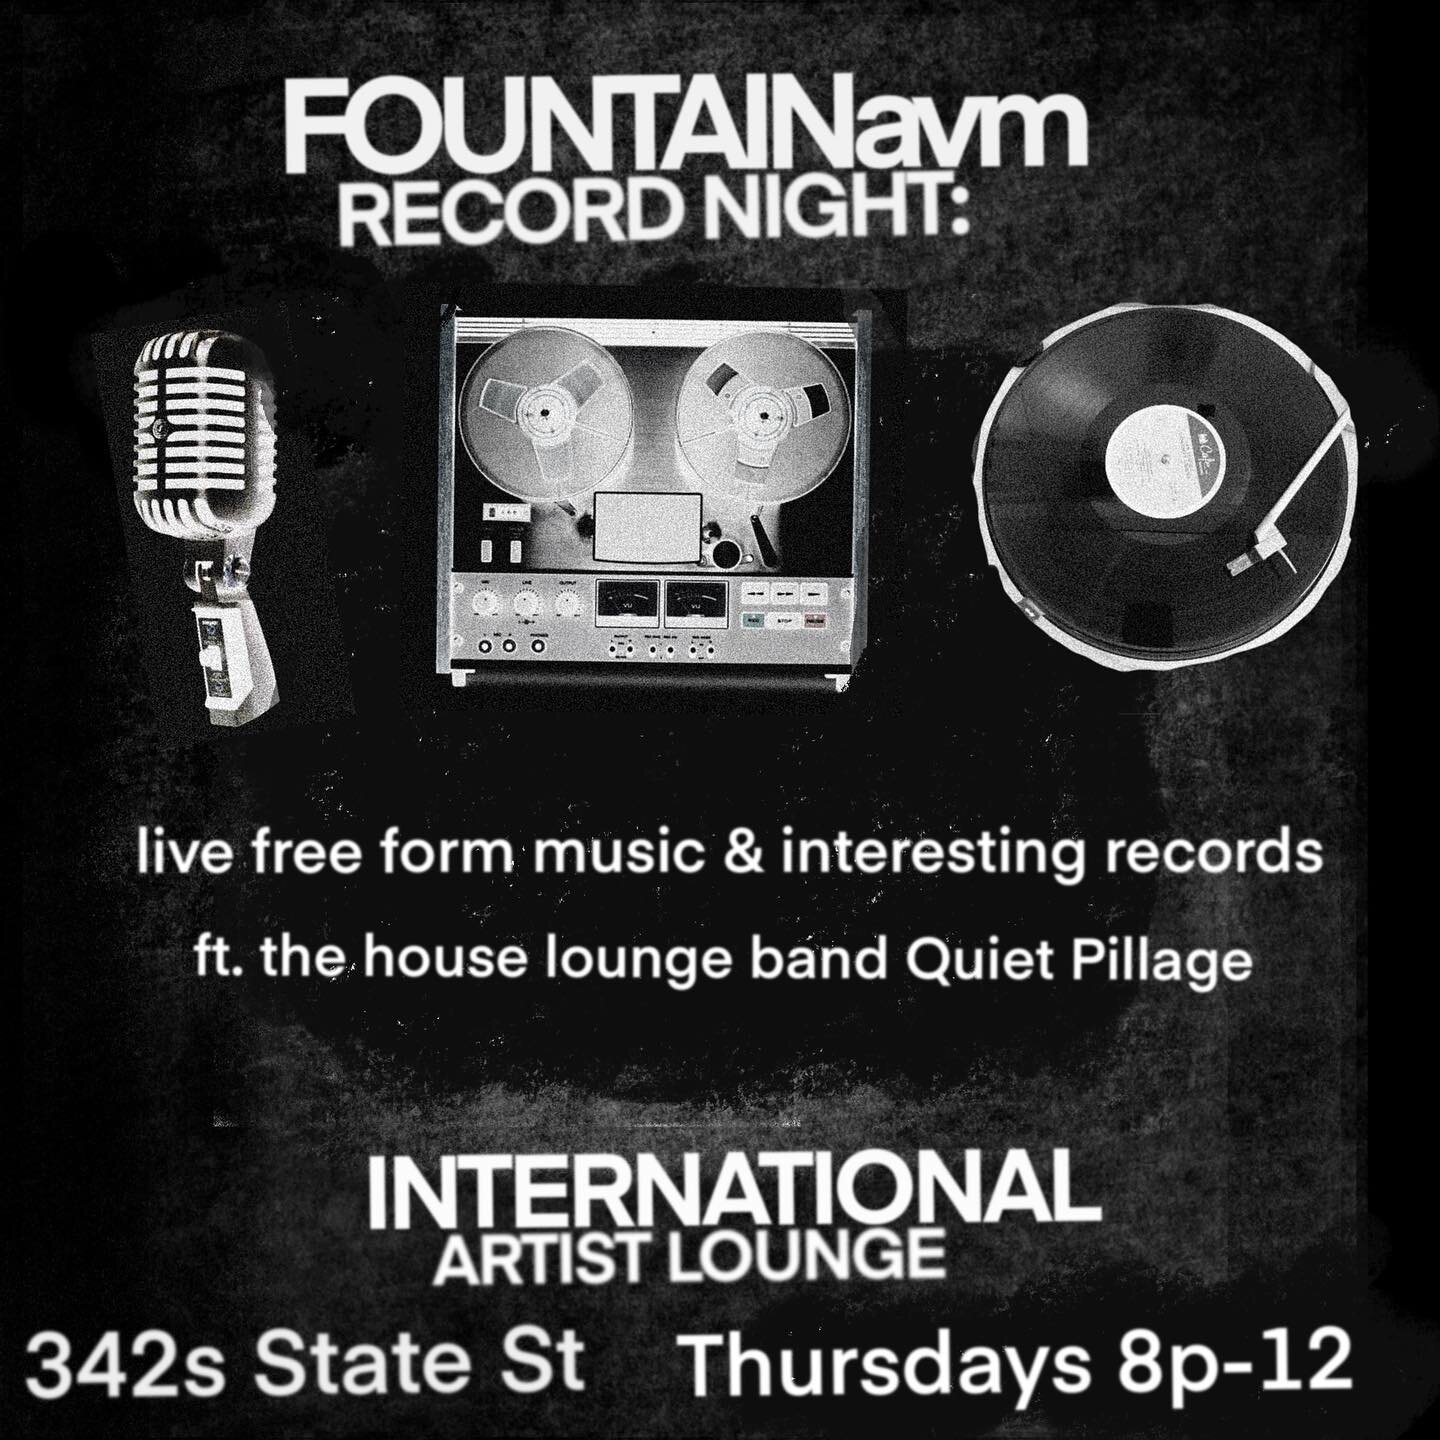 We host Thursday nights at @internationalartistlounge in SLC, Ut. We play interesting records and play live music. Our goals are to share our love of music and records, as well as explore new live forms of music and instrumentation with the hopes of 